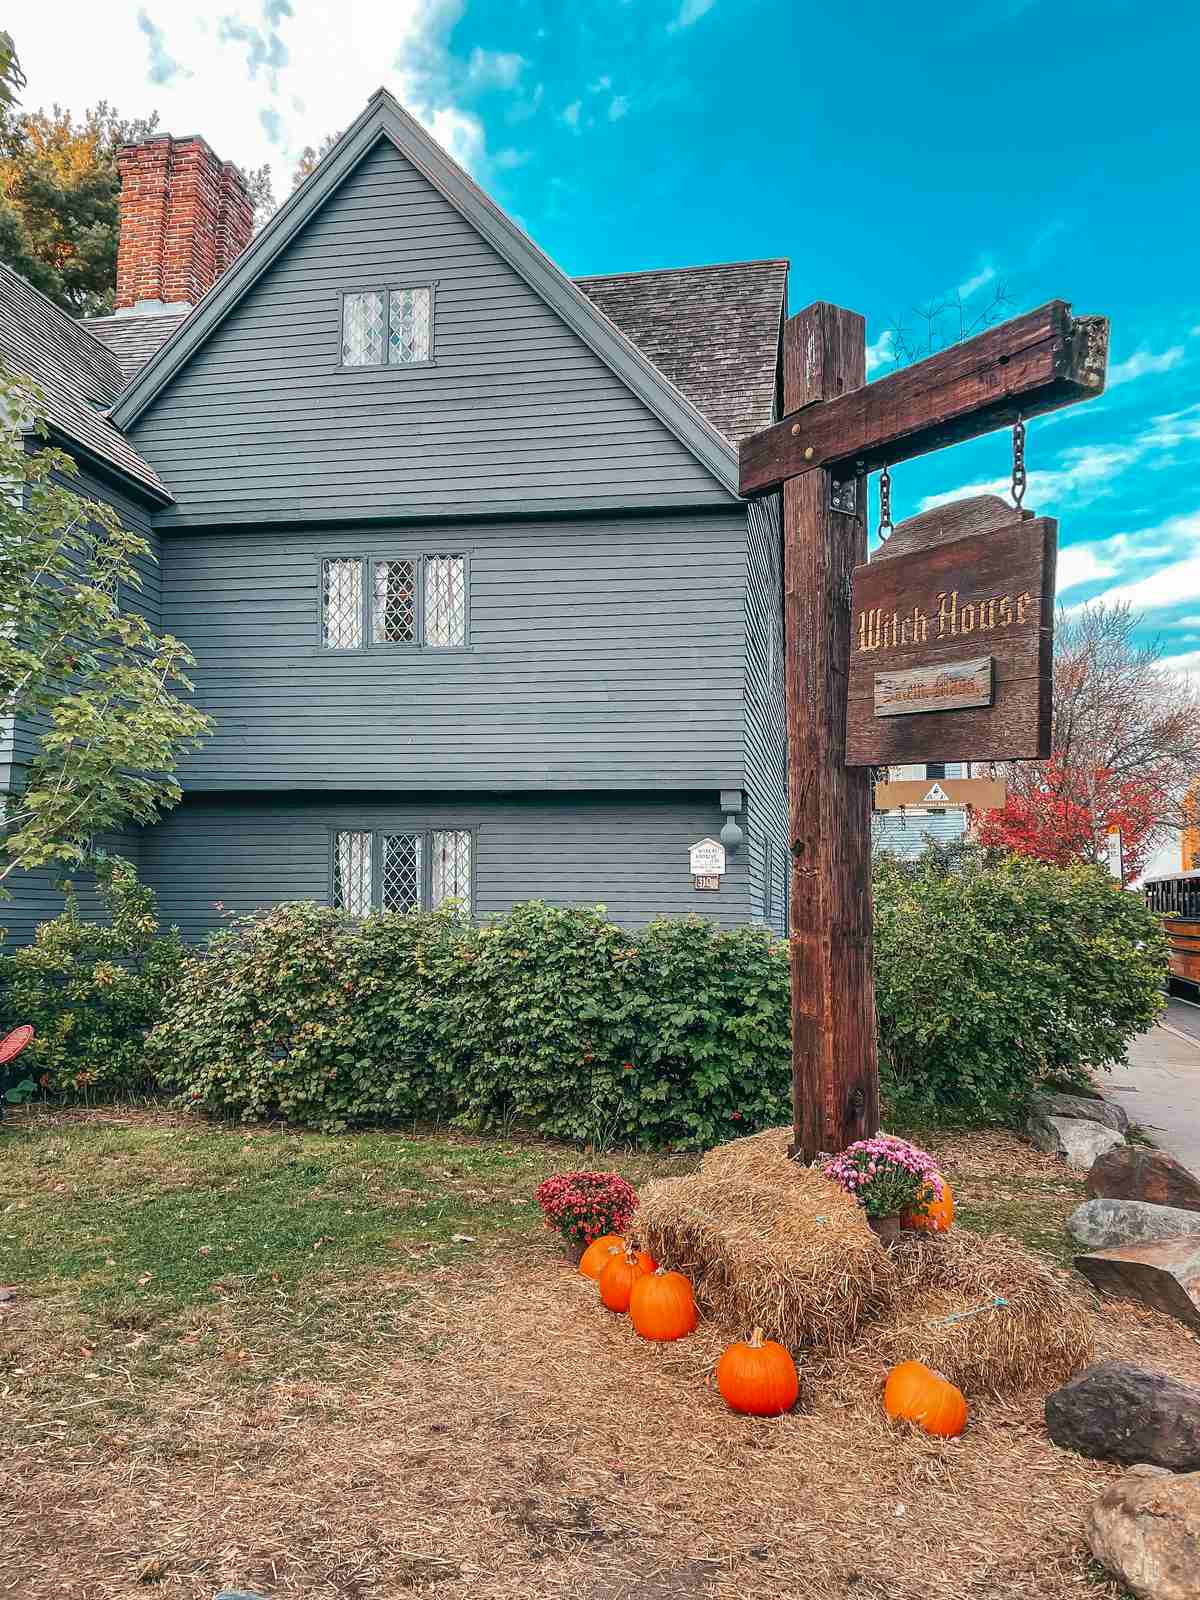 The Witch House in Salem Massachusetts